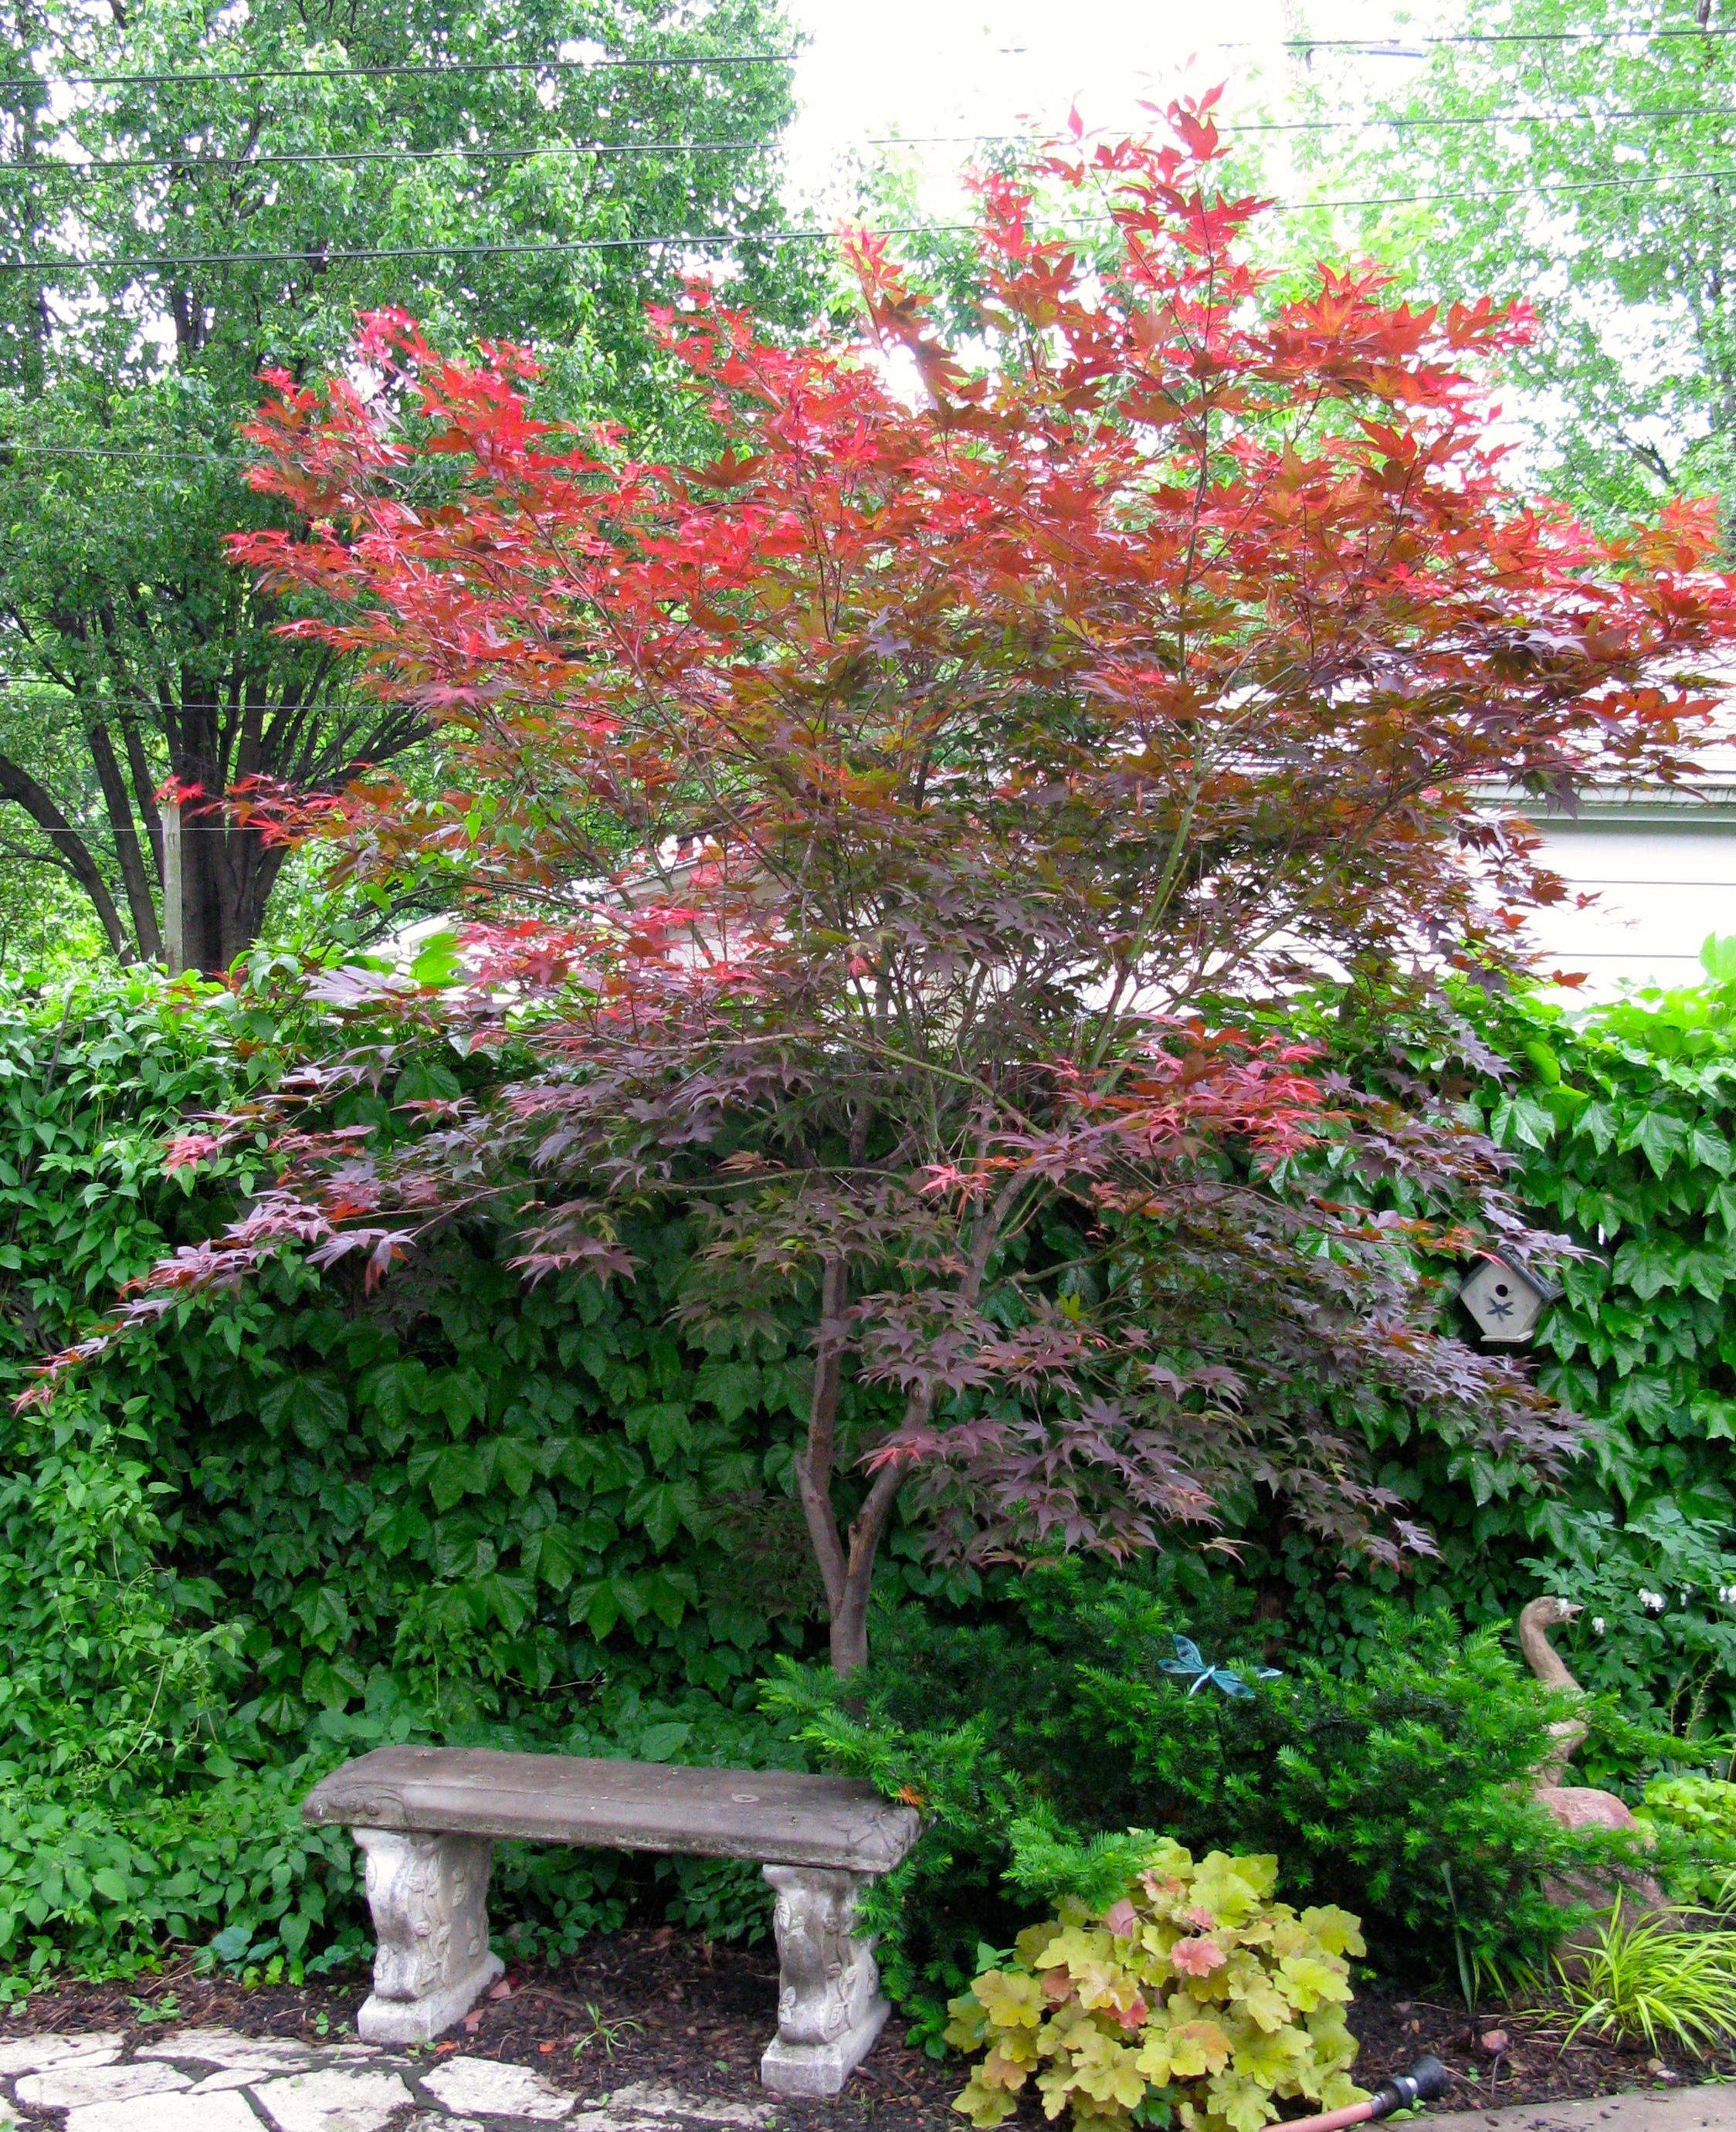 Japanese Maple I Want One Even Better That It Can Be Contained And